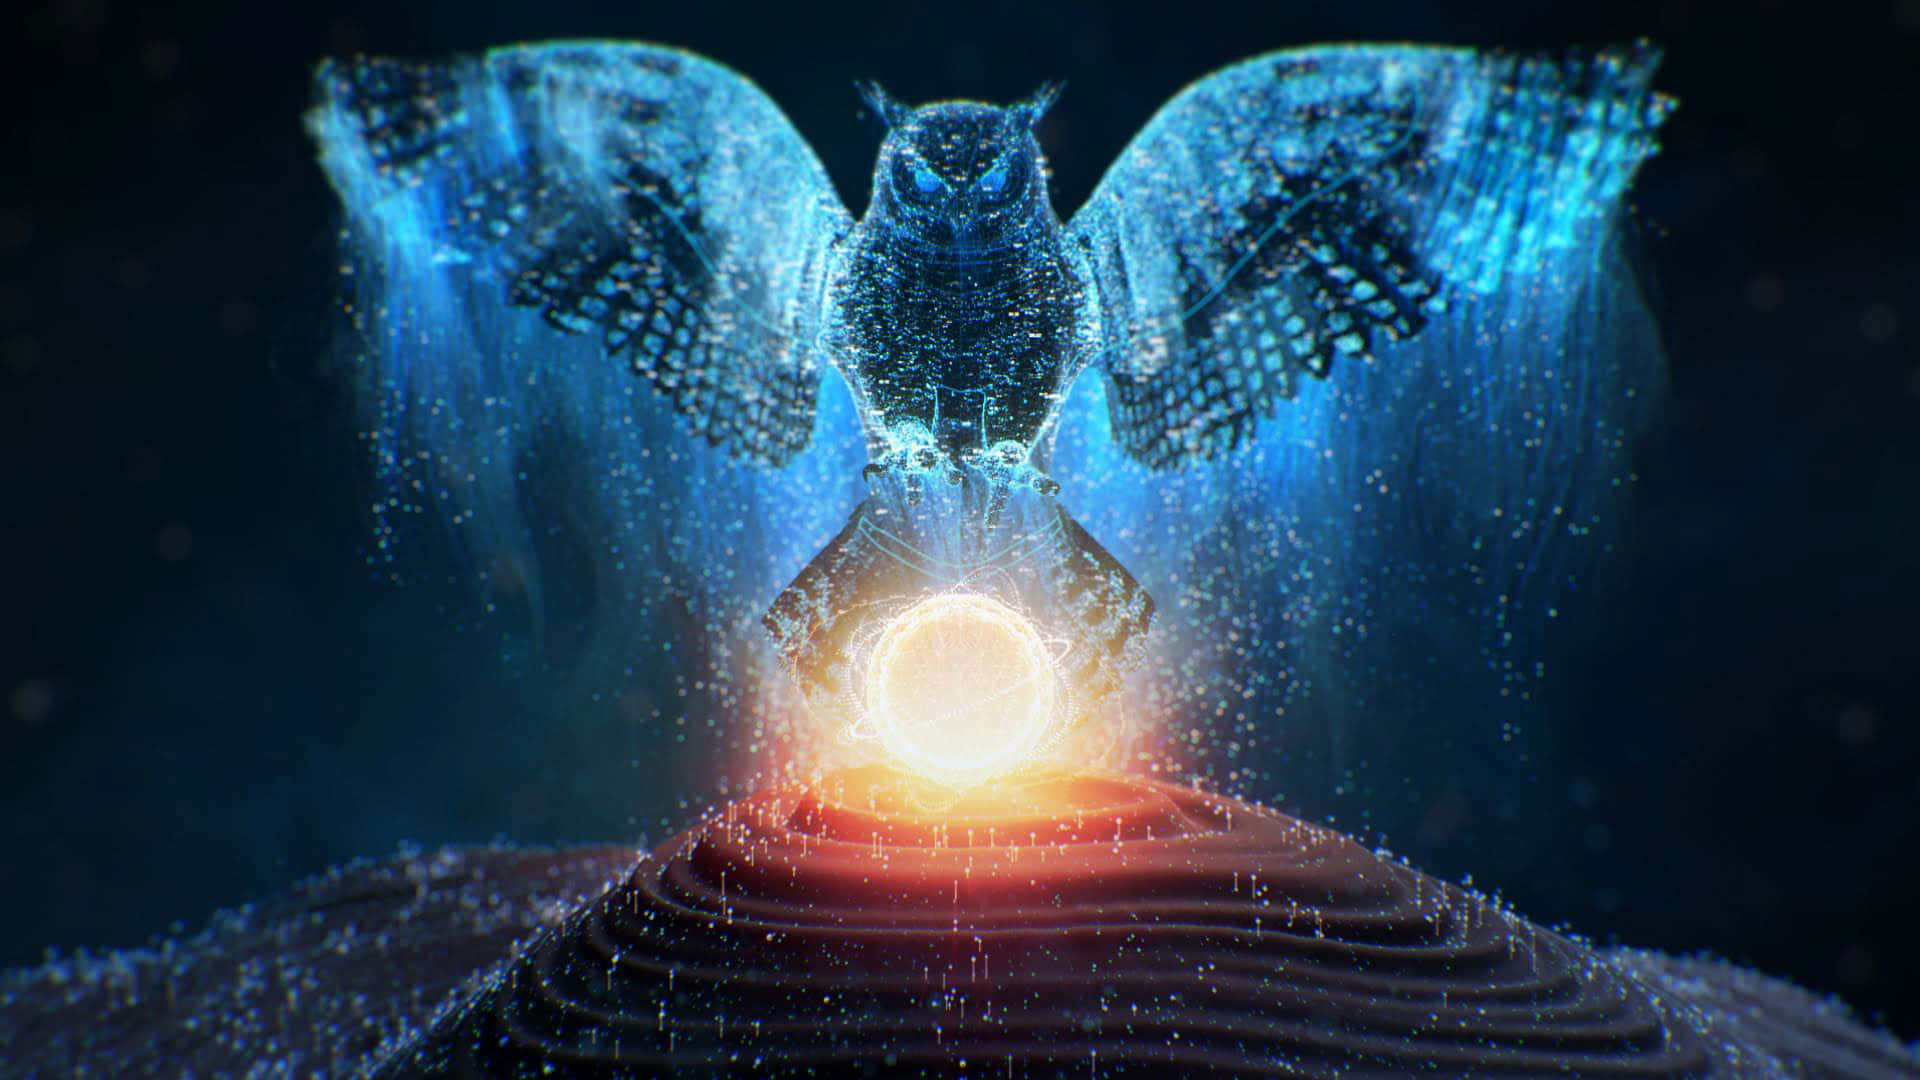 Catch a Glimpse of this Mystical Blue Owl